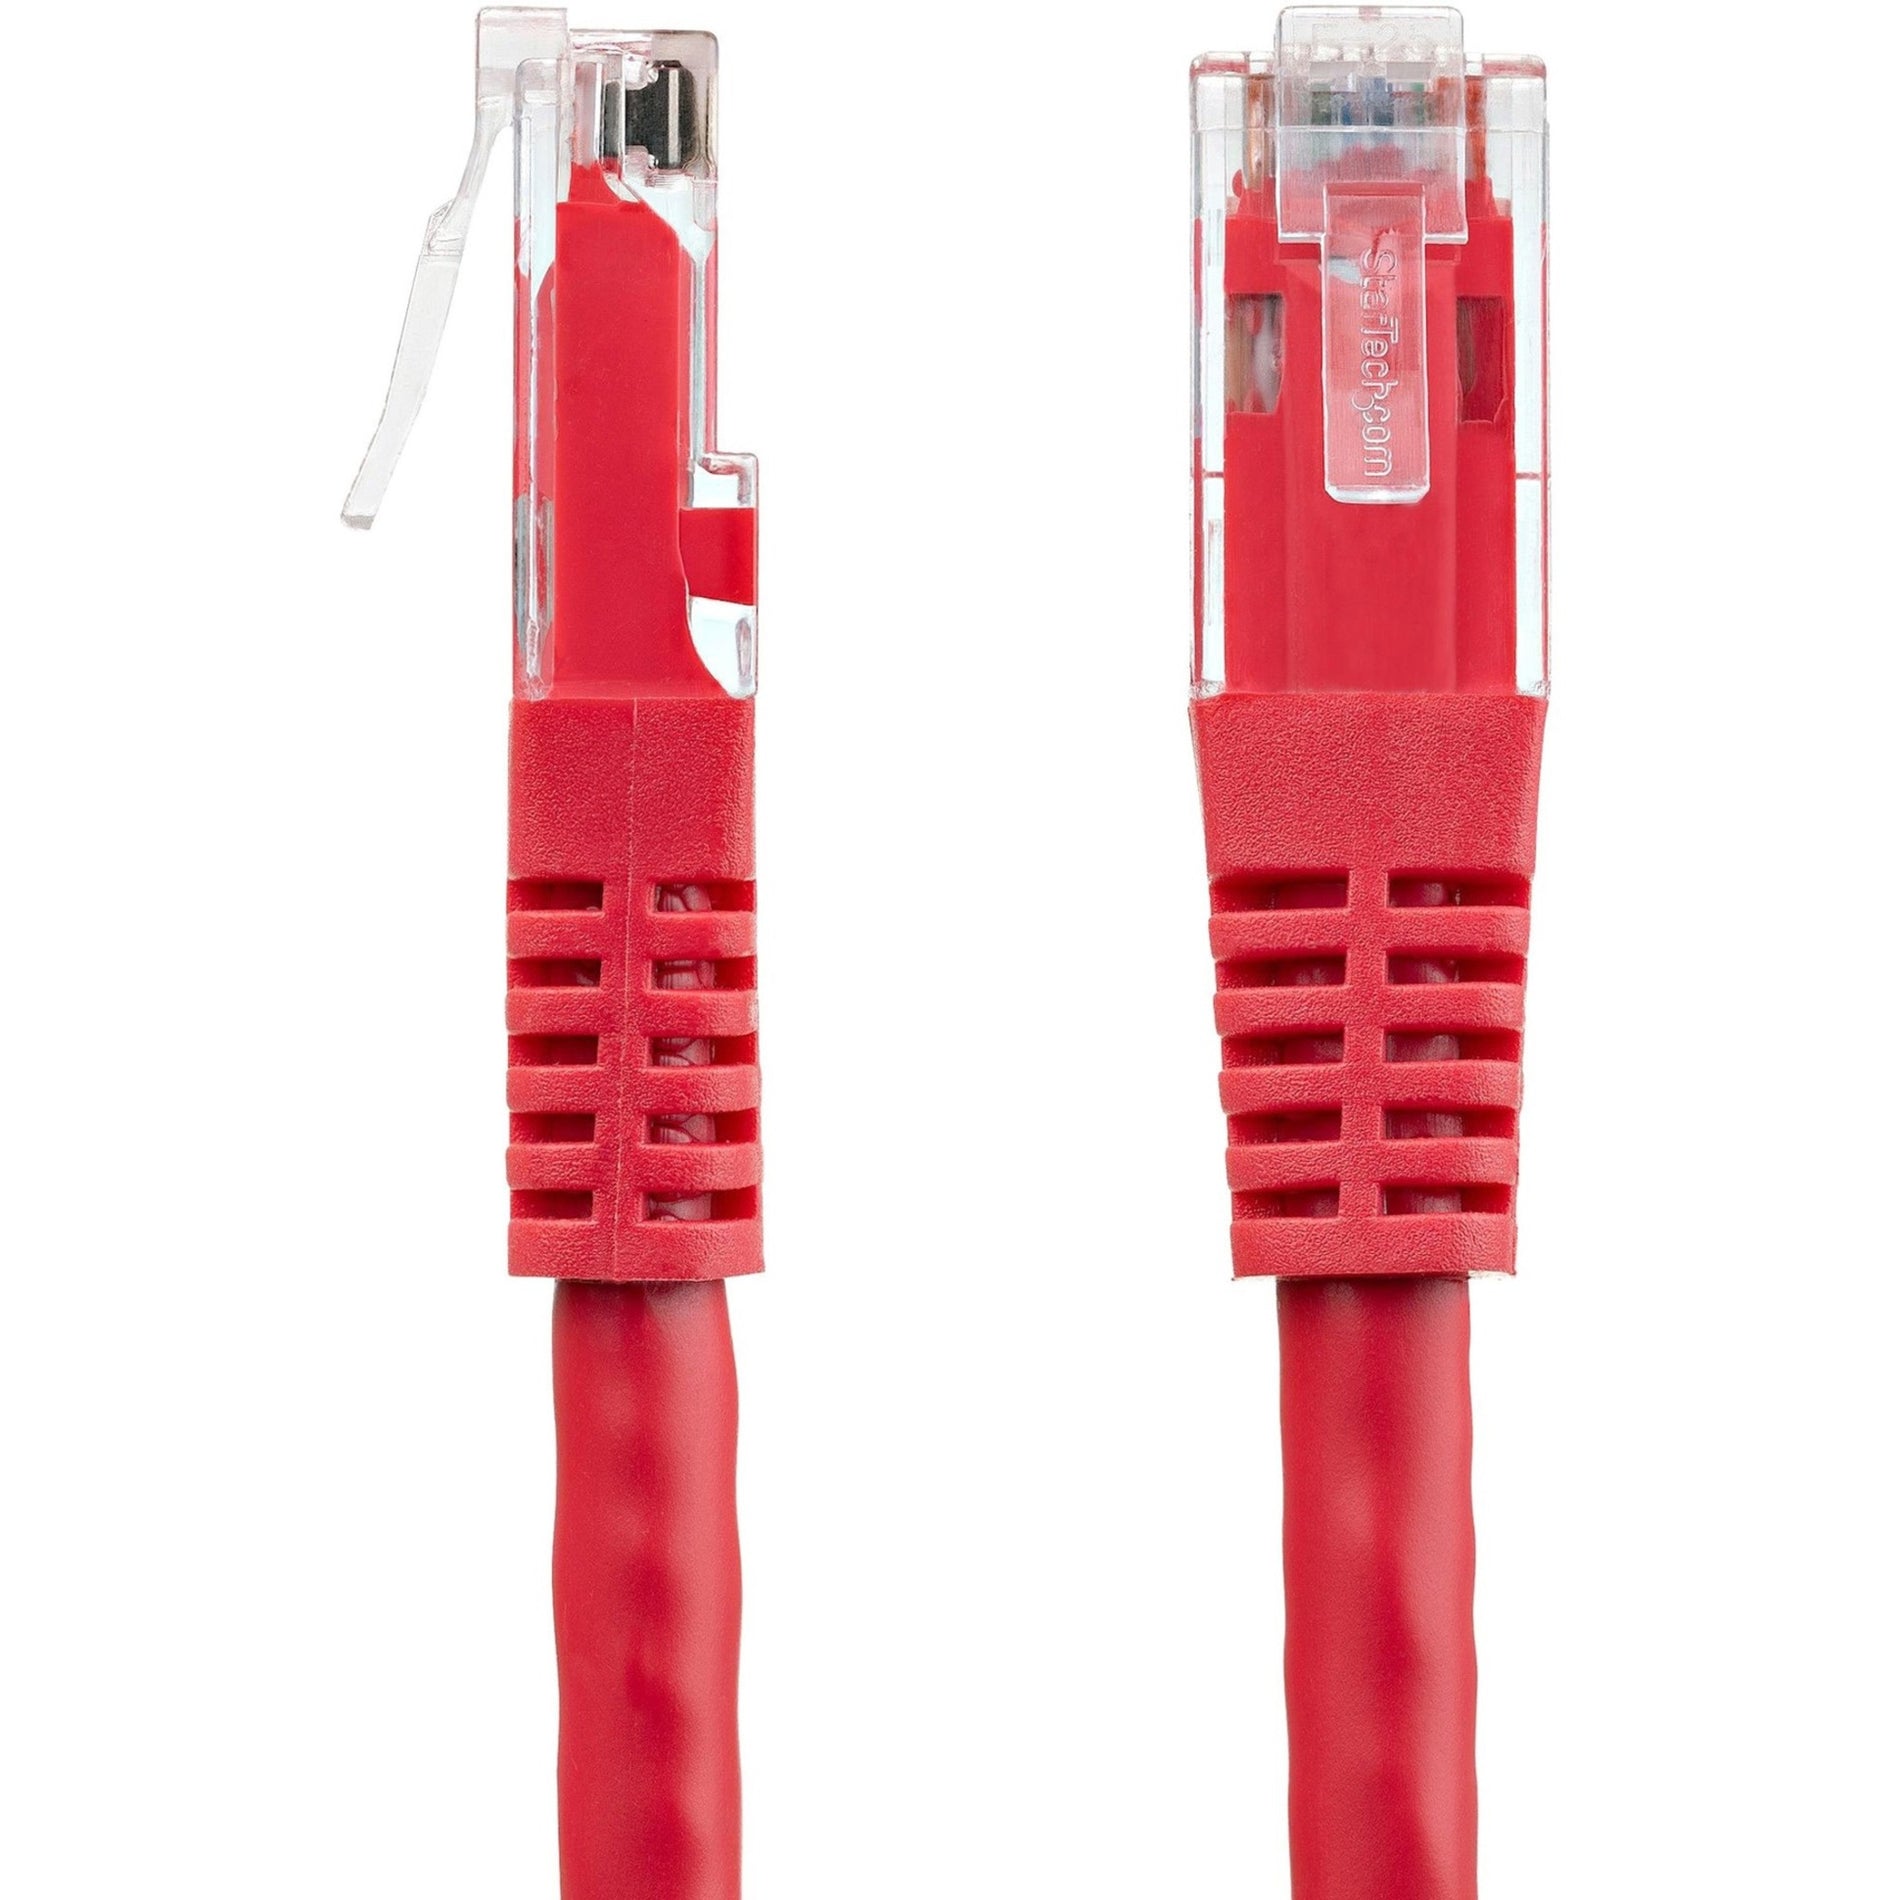 StarTech.com C6PATCH3RD 3ft Red Molded Cat6 UTP Patch Cable ETL Verified, Corrosion Resistant, 10 Gbit/s Data Transfer Rate, Snagless Boot